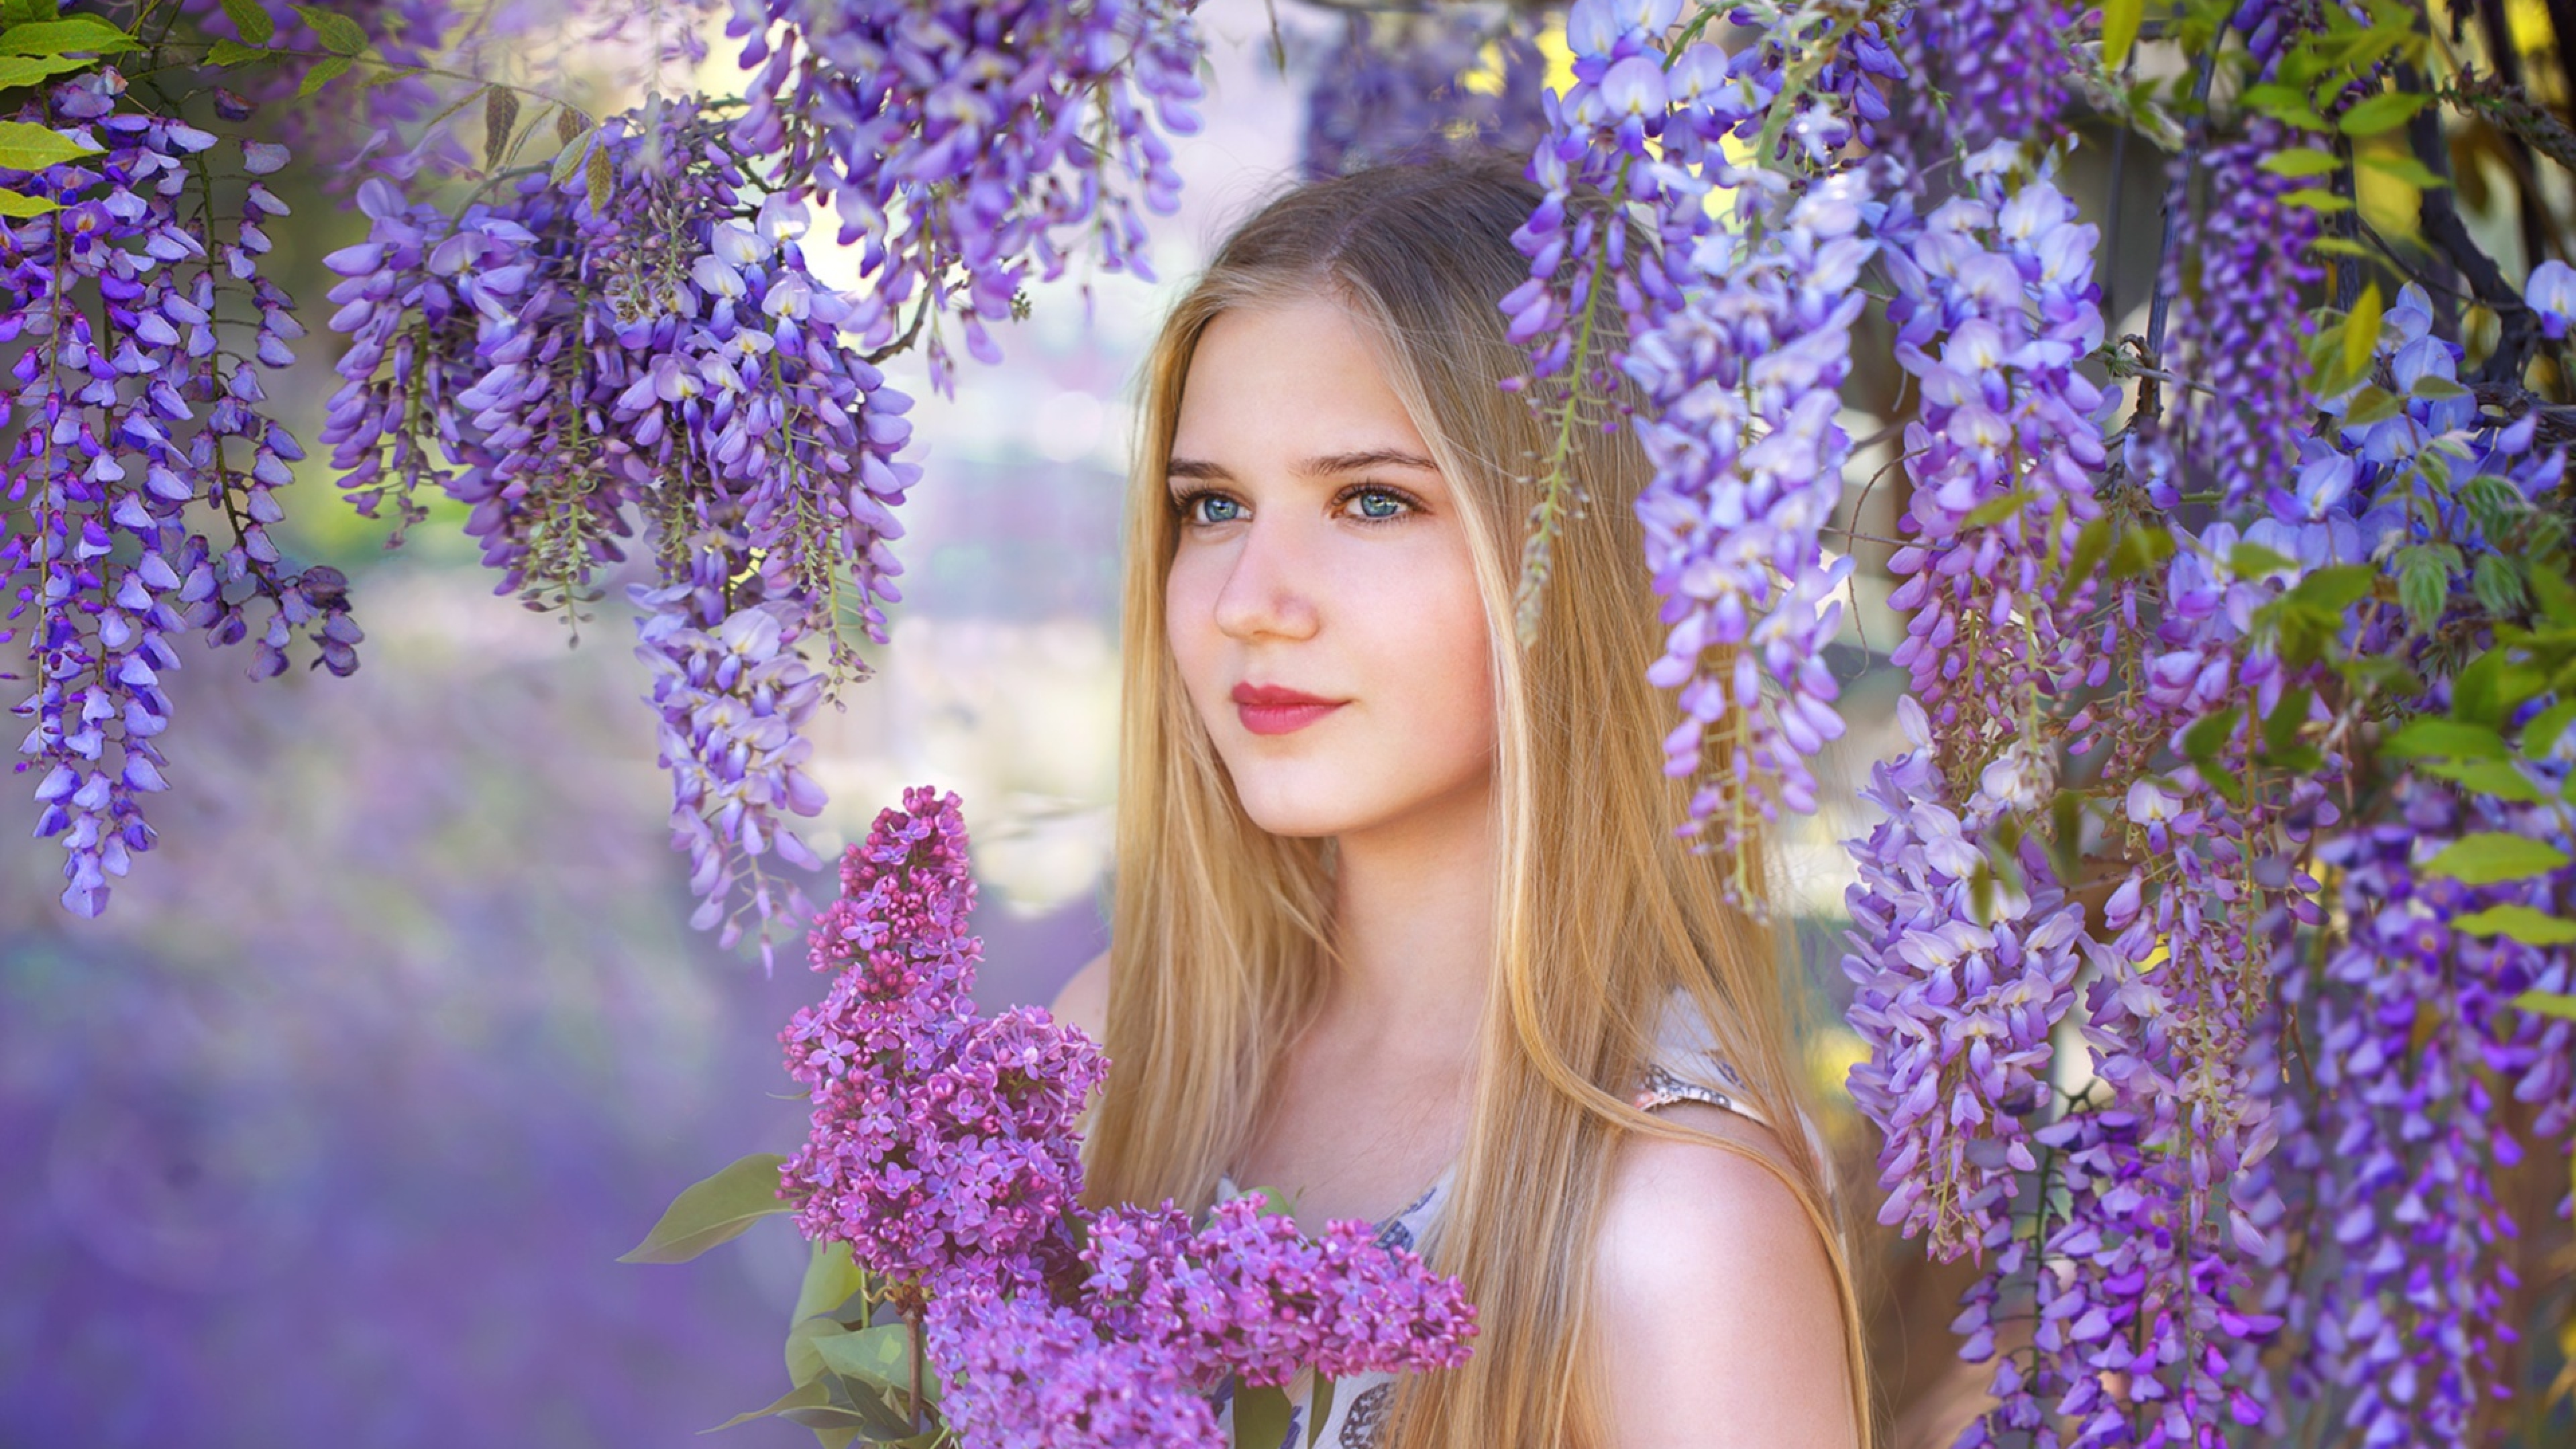 Beautiful Blonde With A Bouquet Of Lilac On The Background Of Wisteria Flowers Wallpapers And Images Wallpapers Pictures Photos